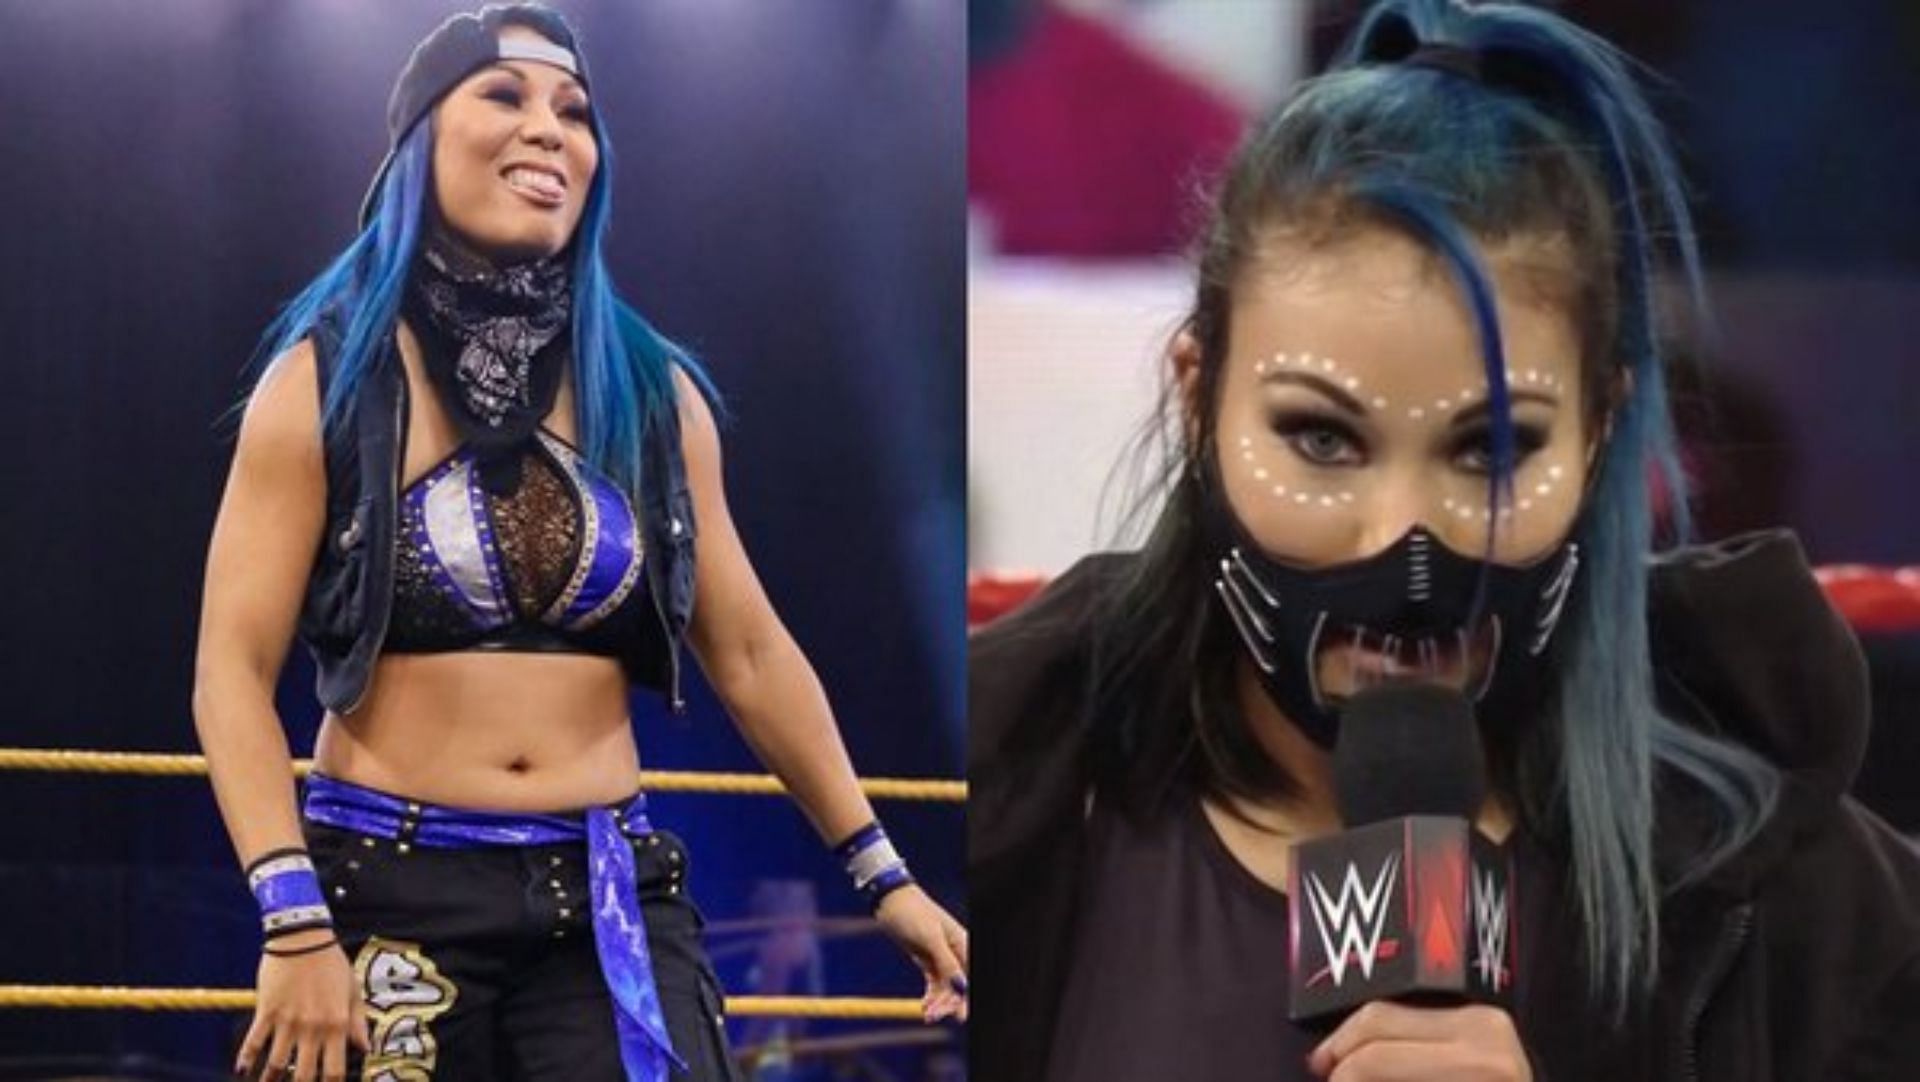 Mia Yim was named Reckoning while in Retribution!